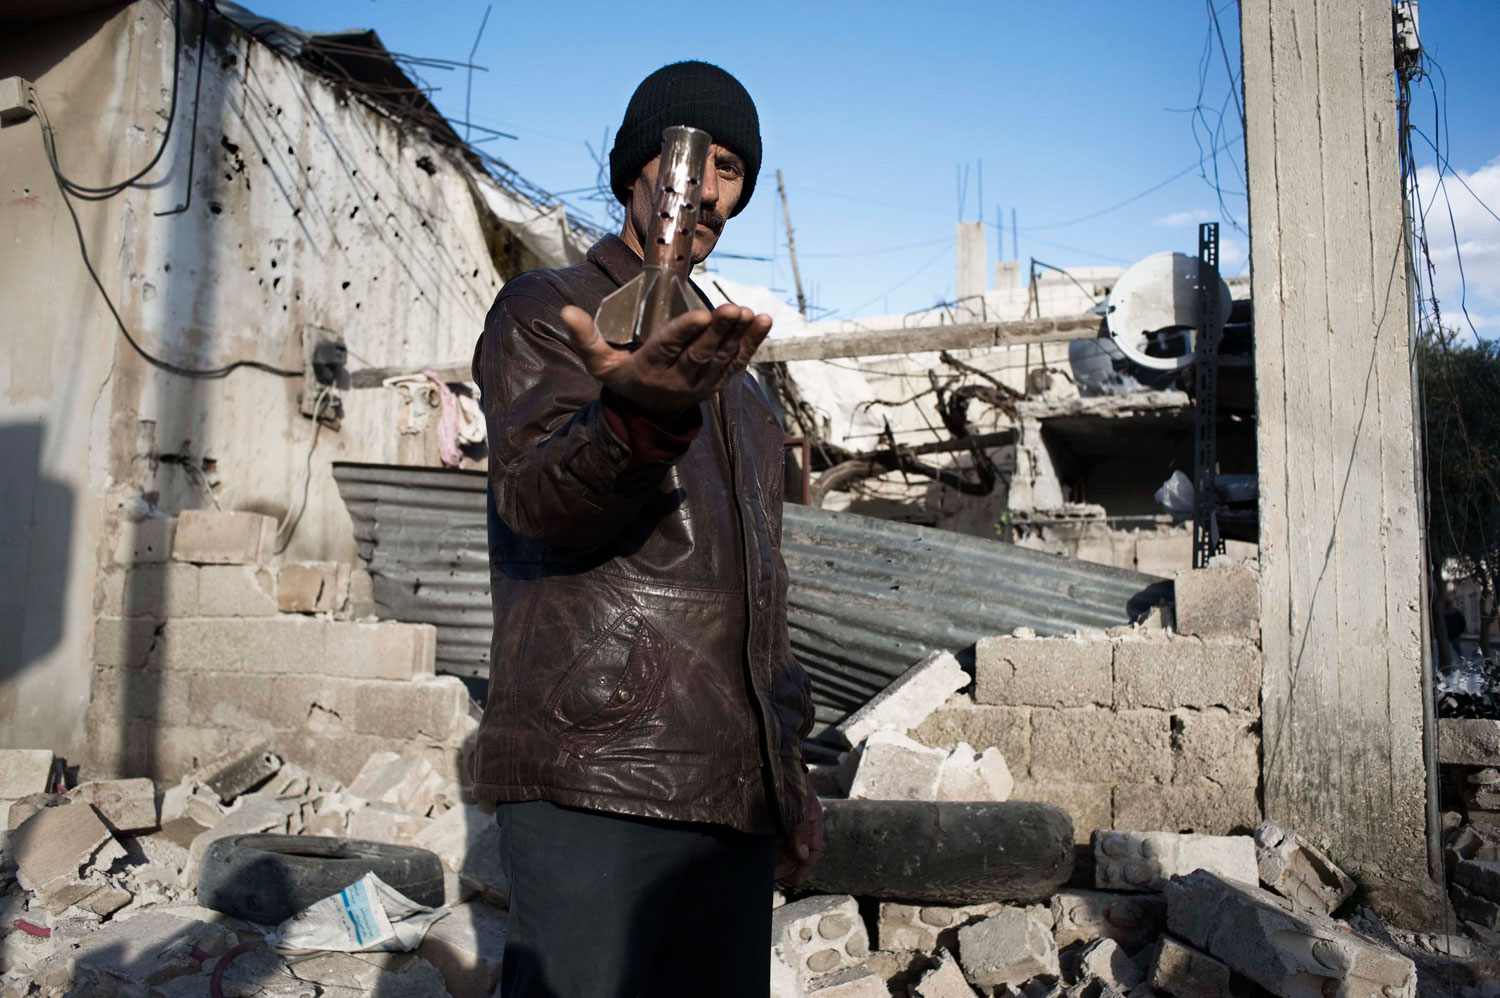 Feb. 9, 2012. A man displays part of a mortar lauched by the Syrian Army that destroyed the house behind him, in al-Qsair.